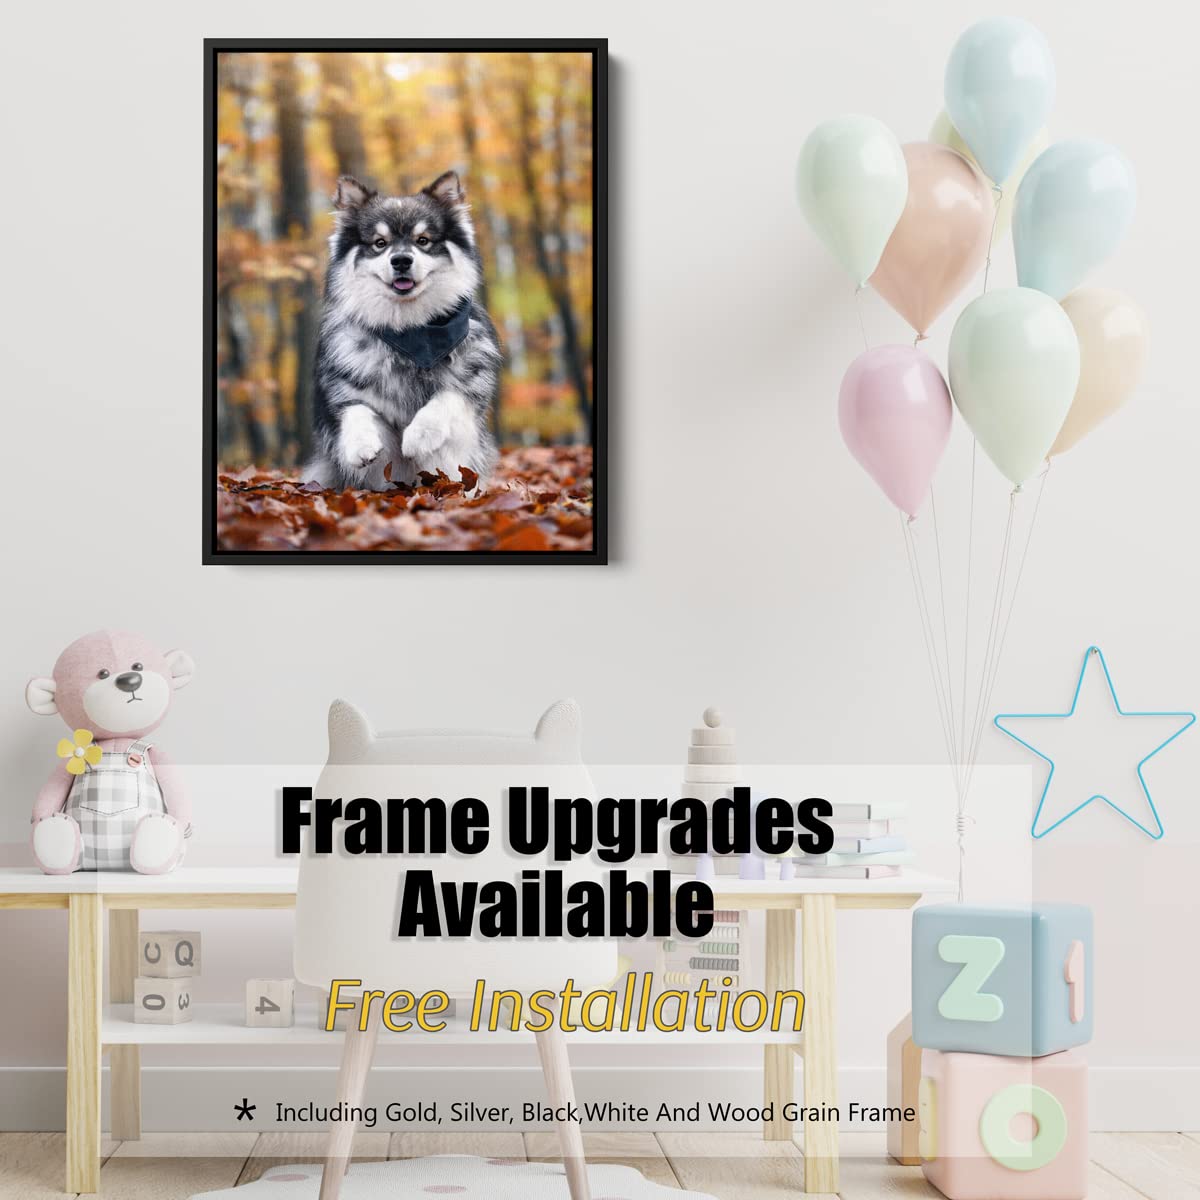 Custom Canvas Prints With Your Photos,Personalized Pictures On Canvas Wall Art for Bedroom, Living Room, Wedding Baby Pet Family Picture Framed Wall Art (5